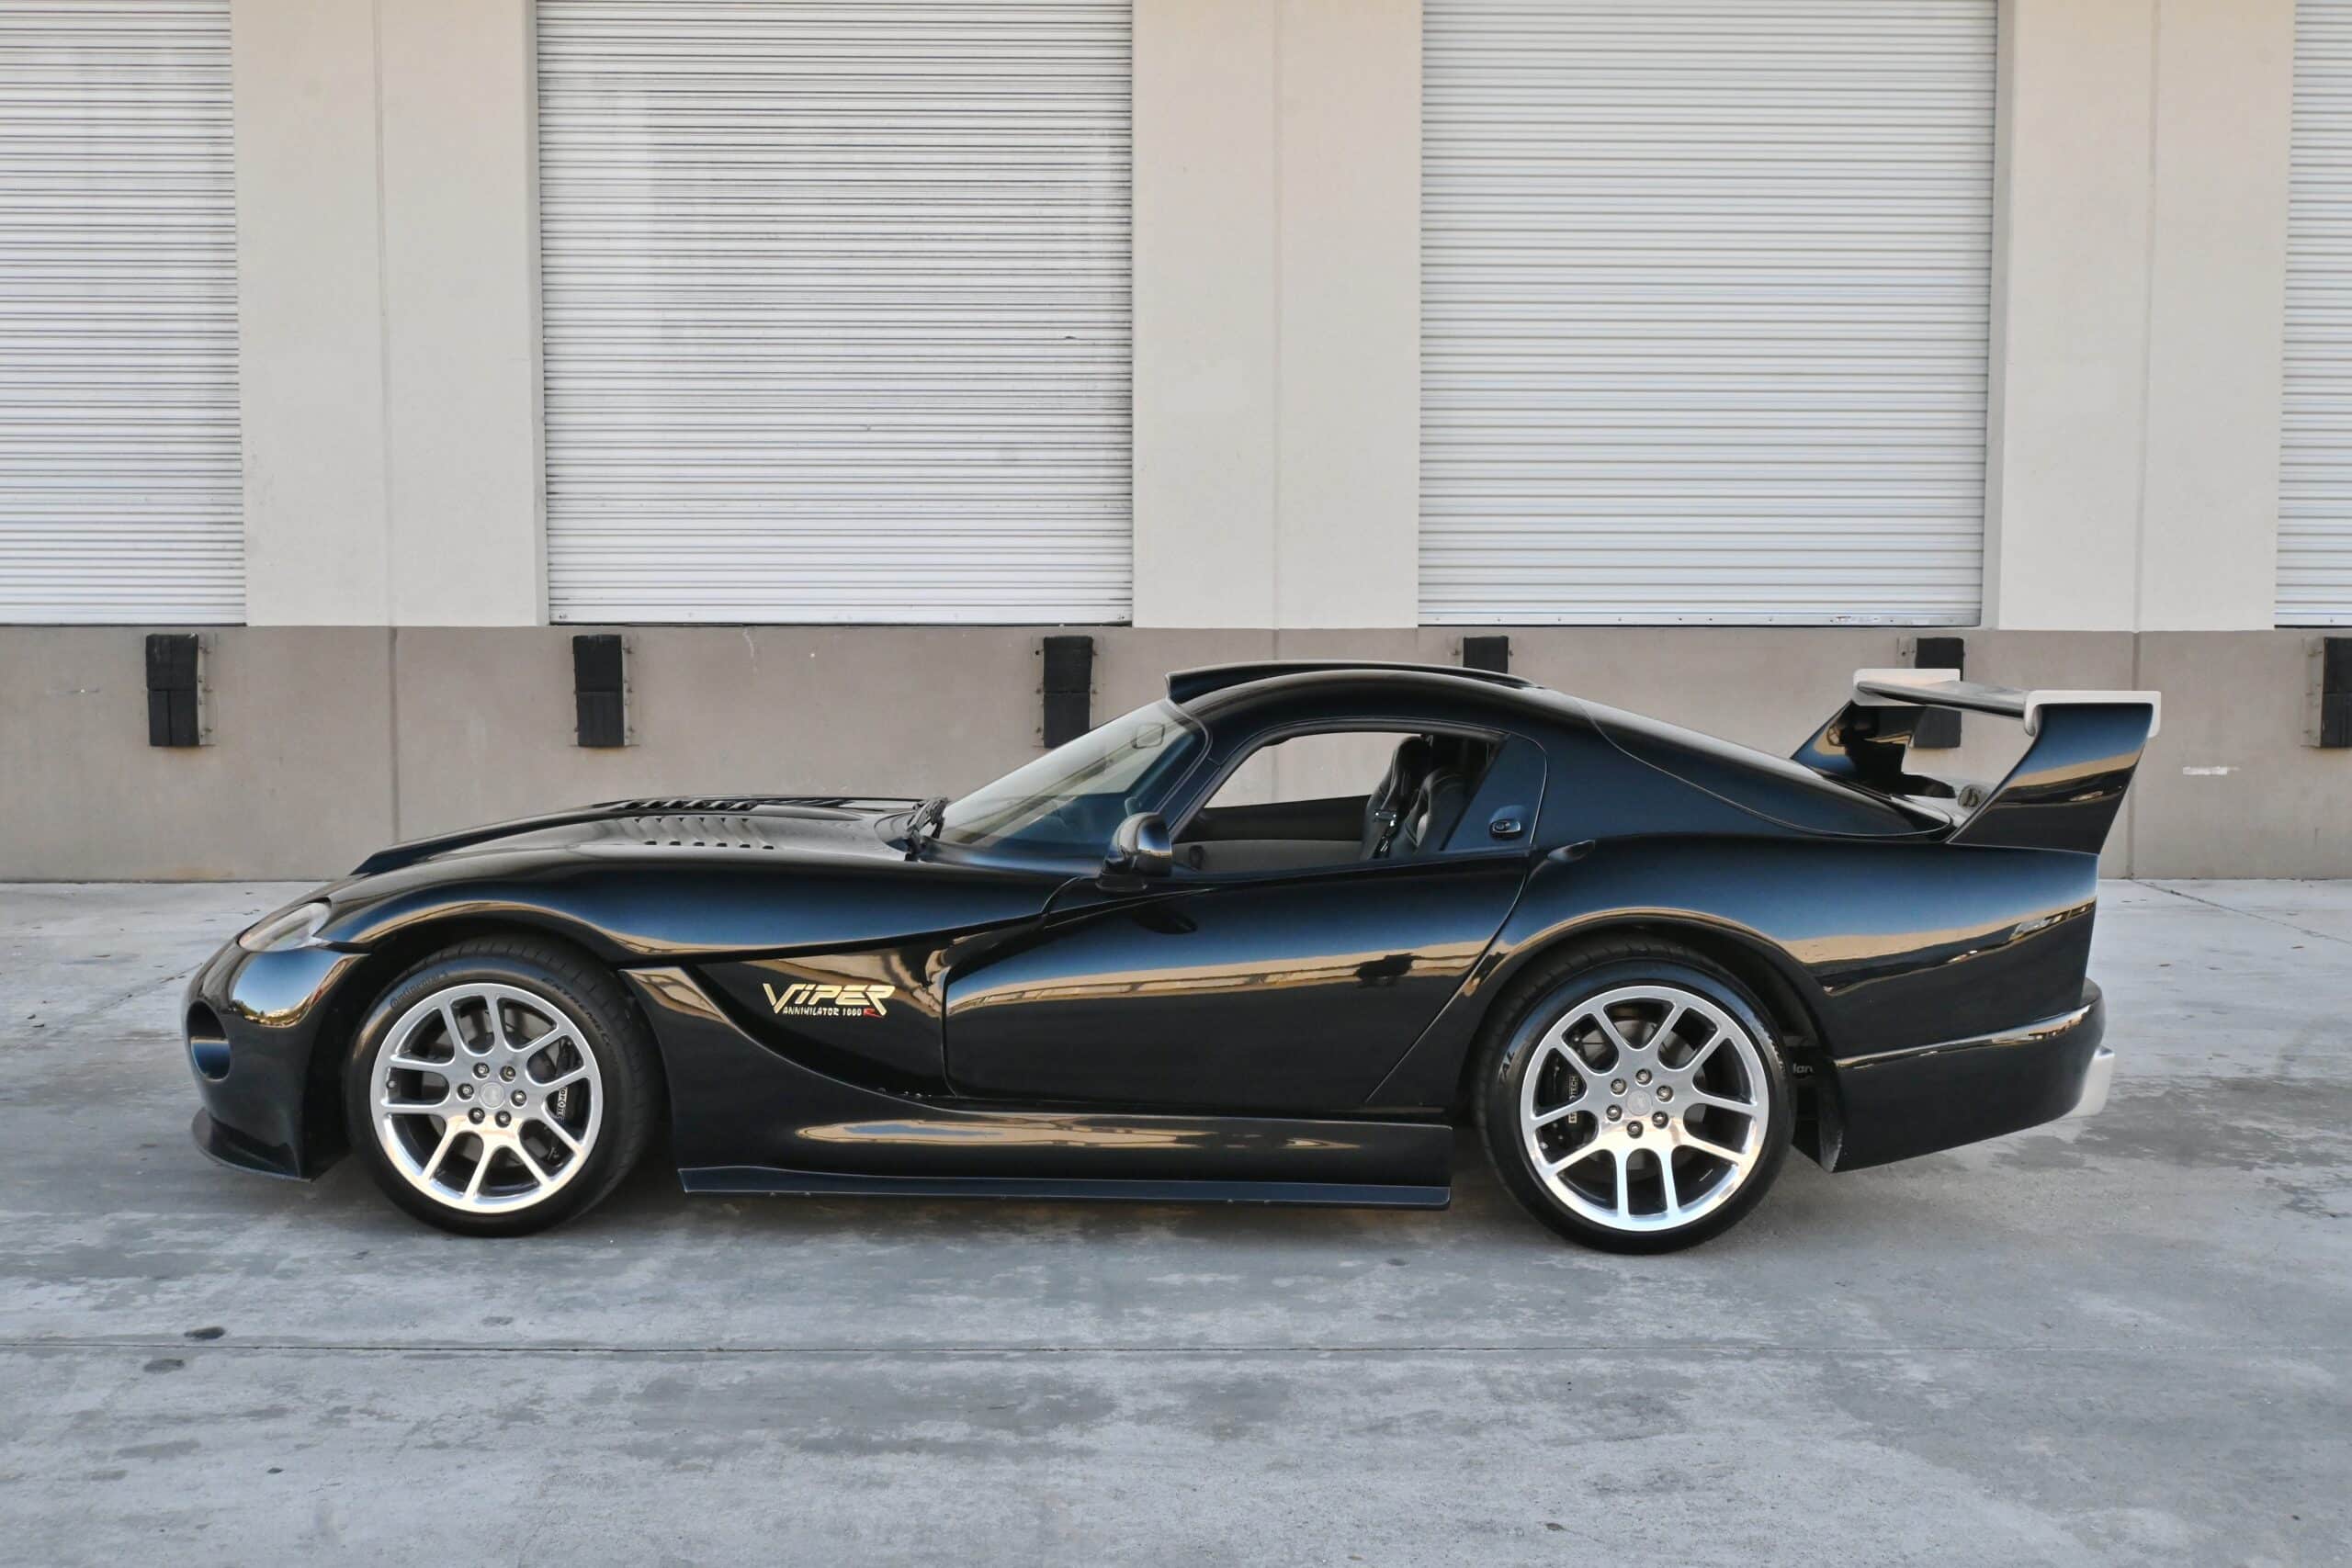 1999 Dodge Viper GTS / Supercharged / Wide body kit / Over $100k invested Custom Built Annihilator S/C 880WHP